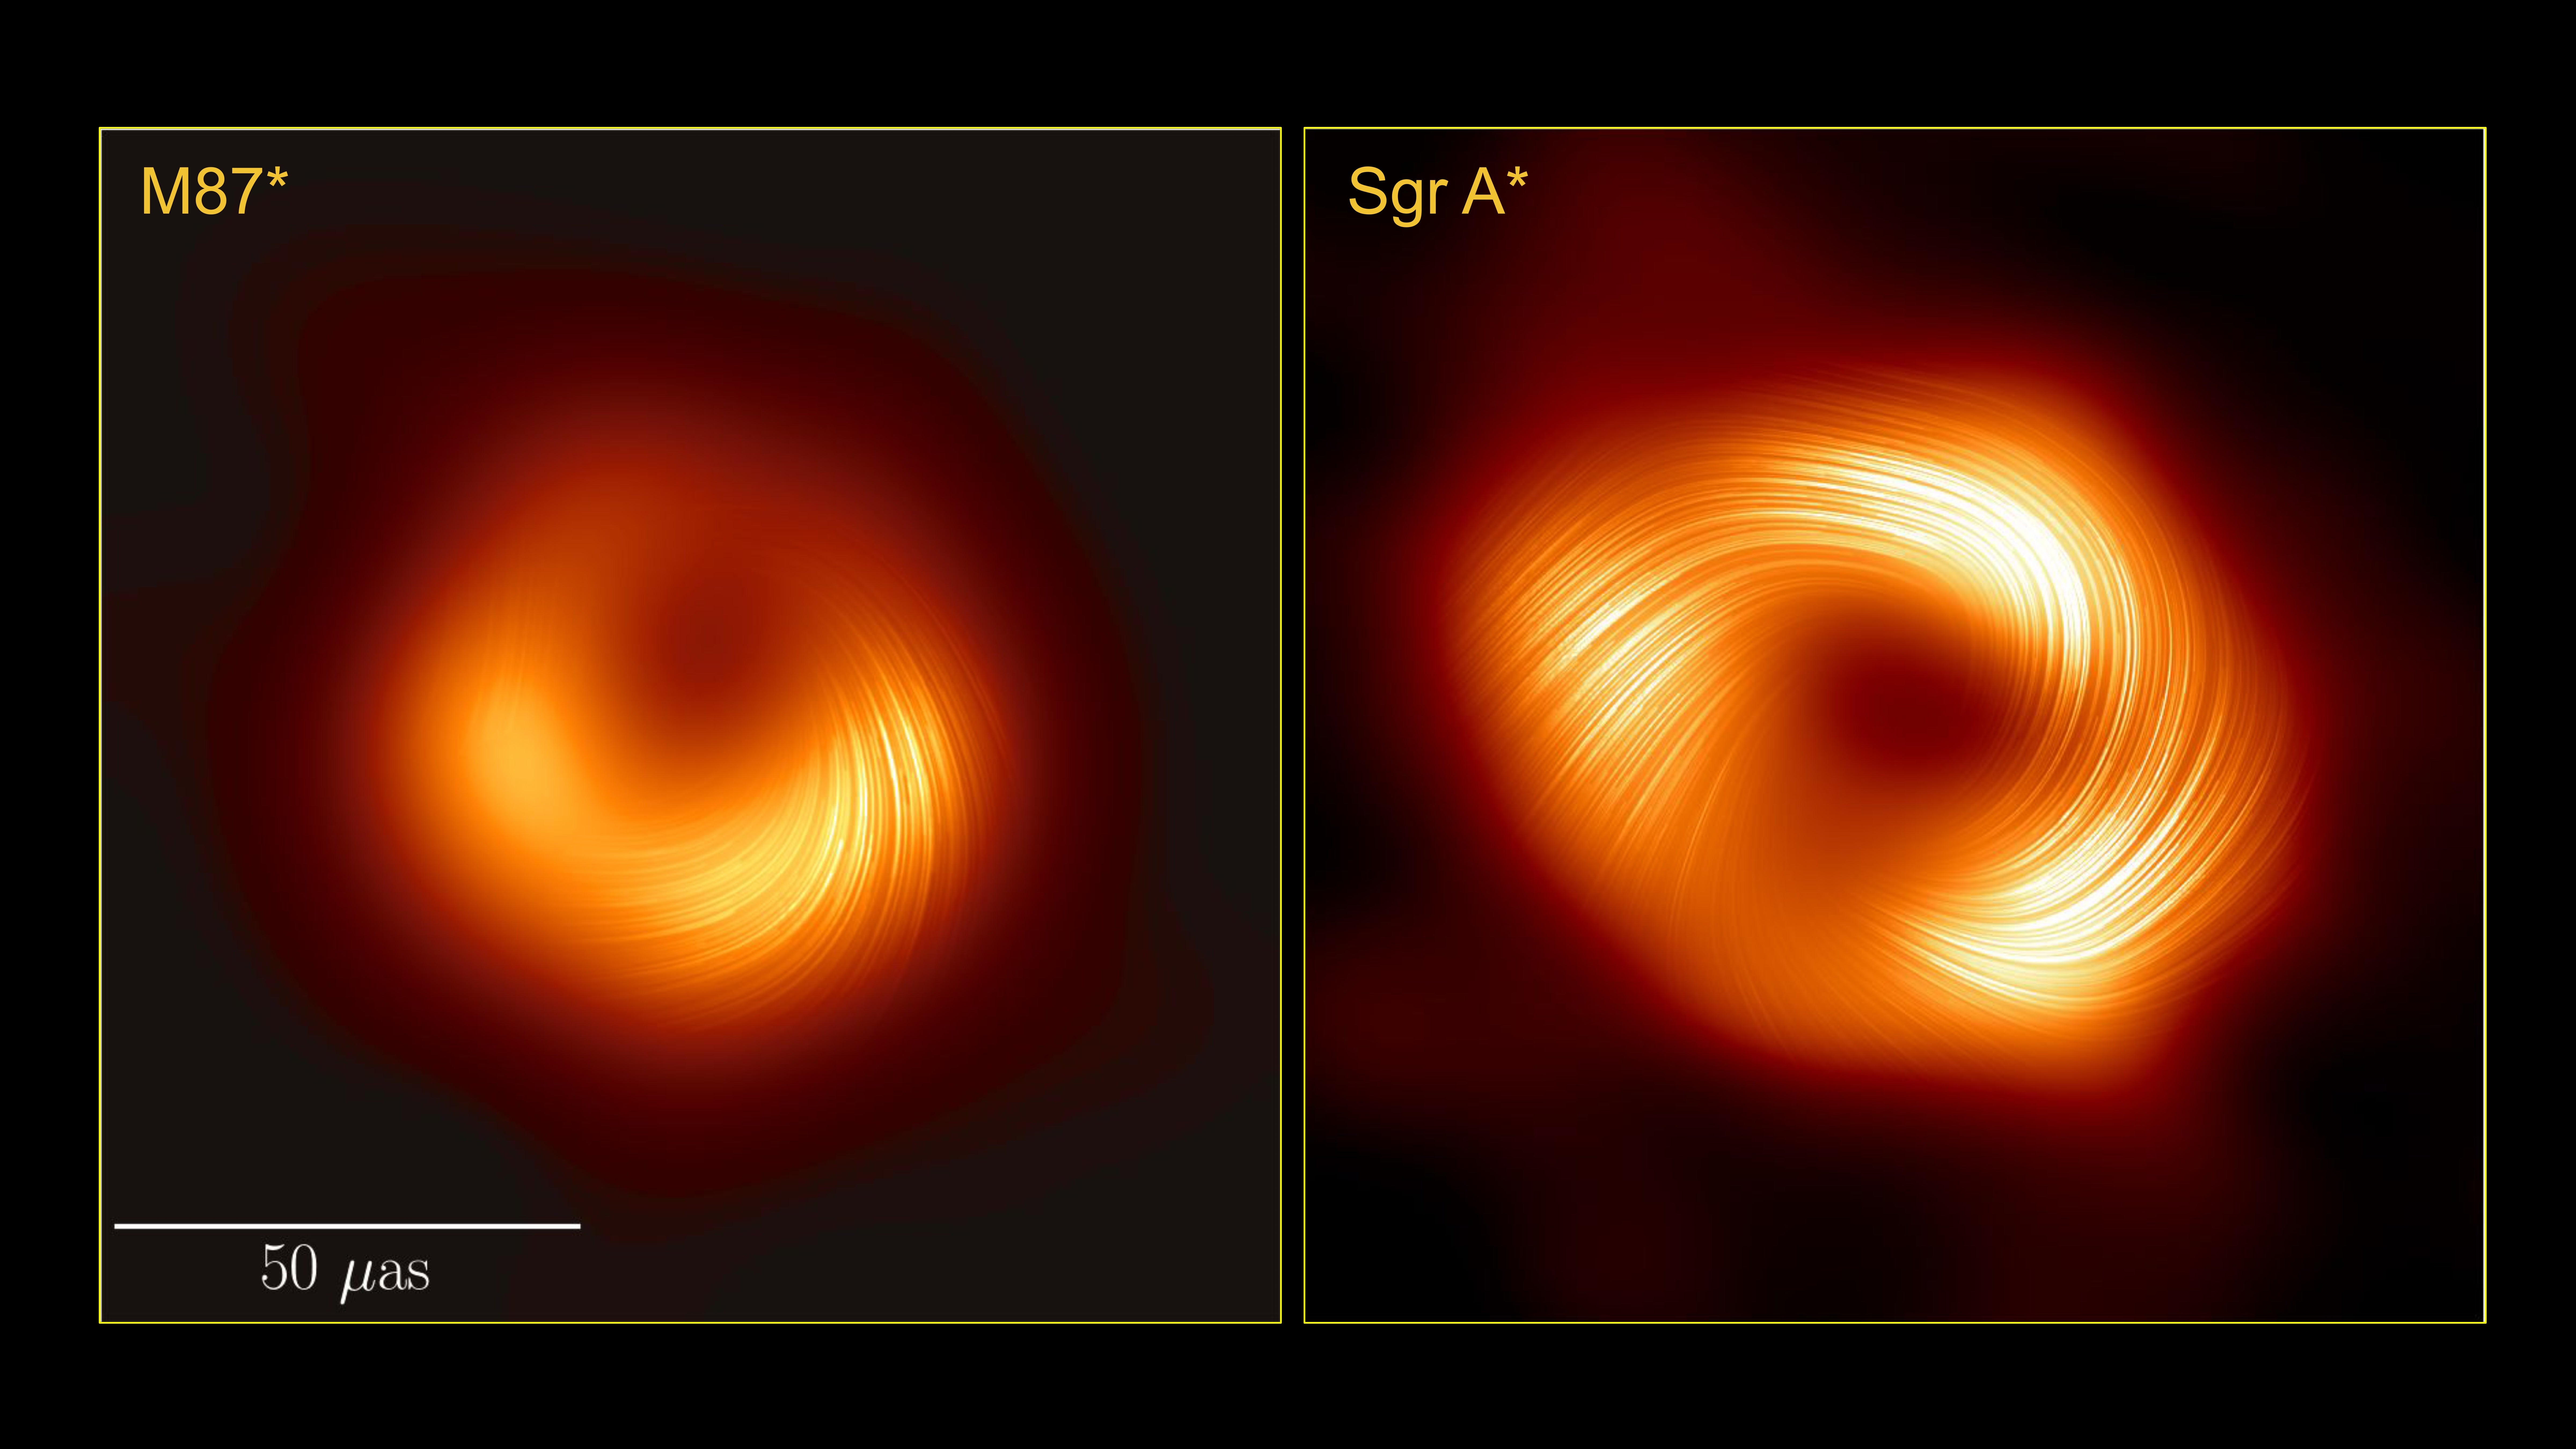 The image was created by the scientists as part of the Event Horizon Telescope collaboration